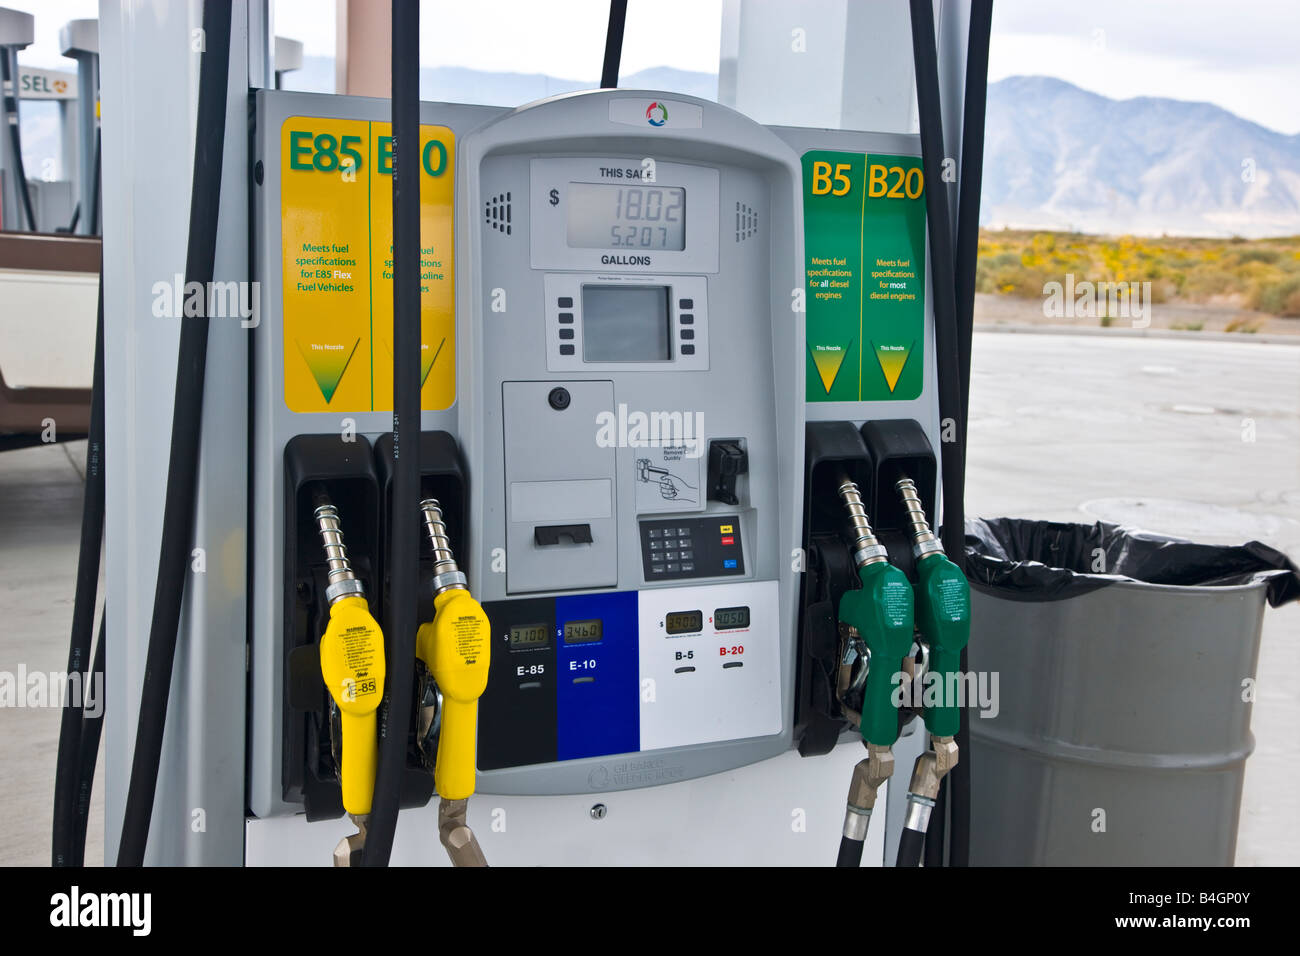 Biofuels pumps at service station. Stock Photo